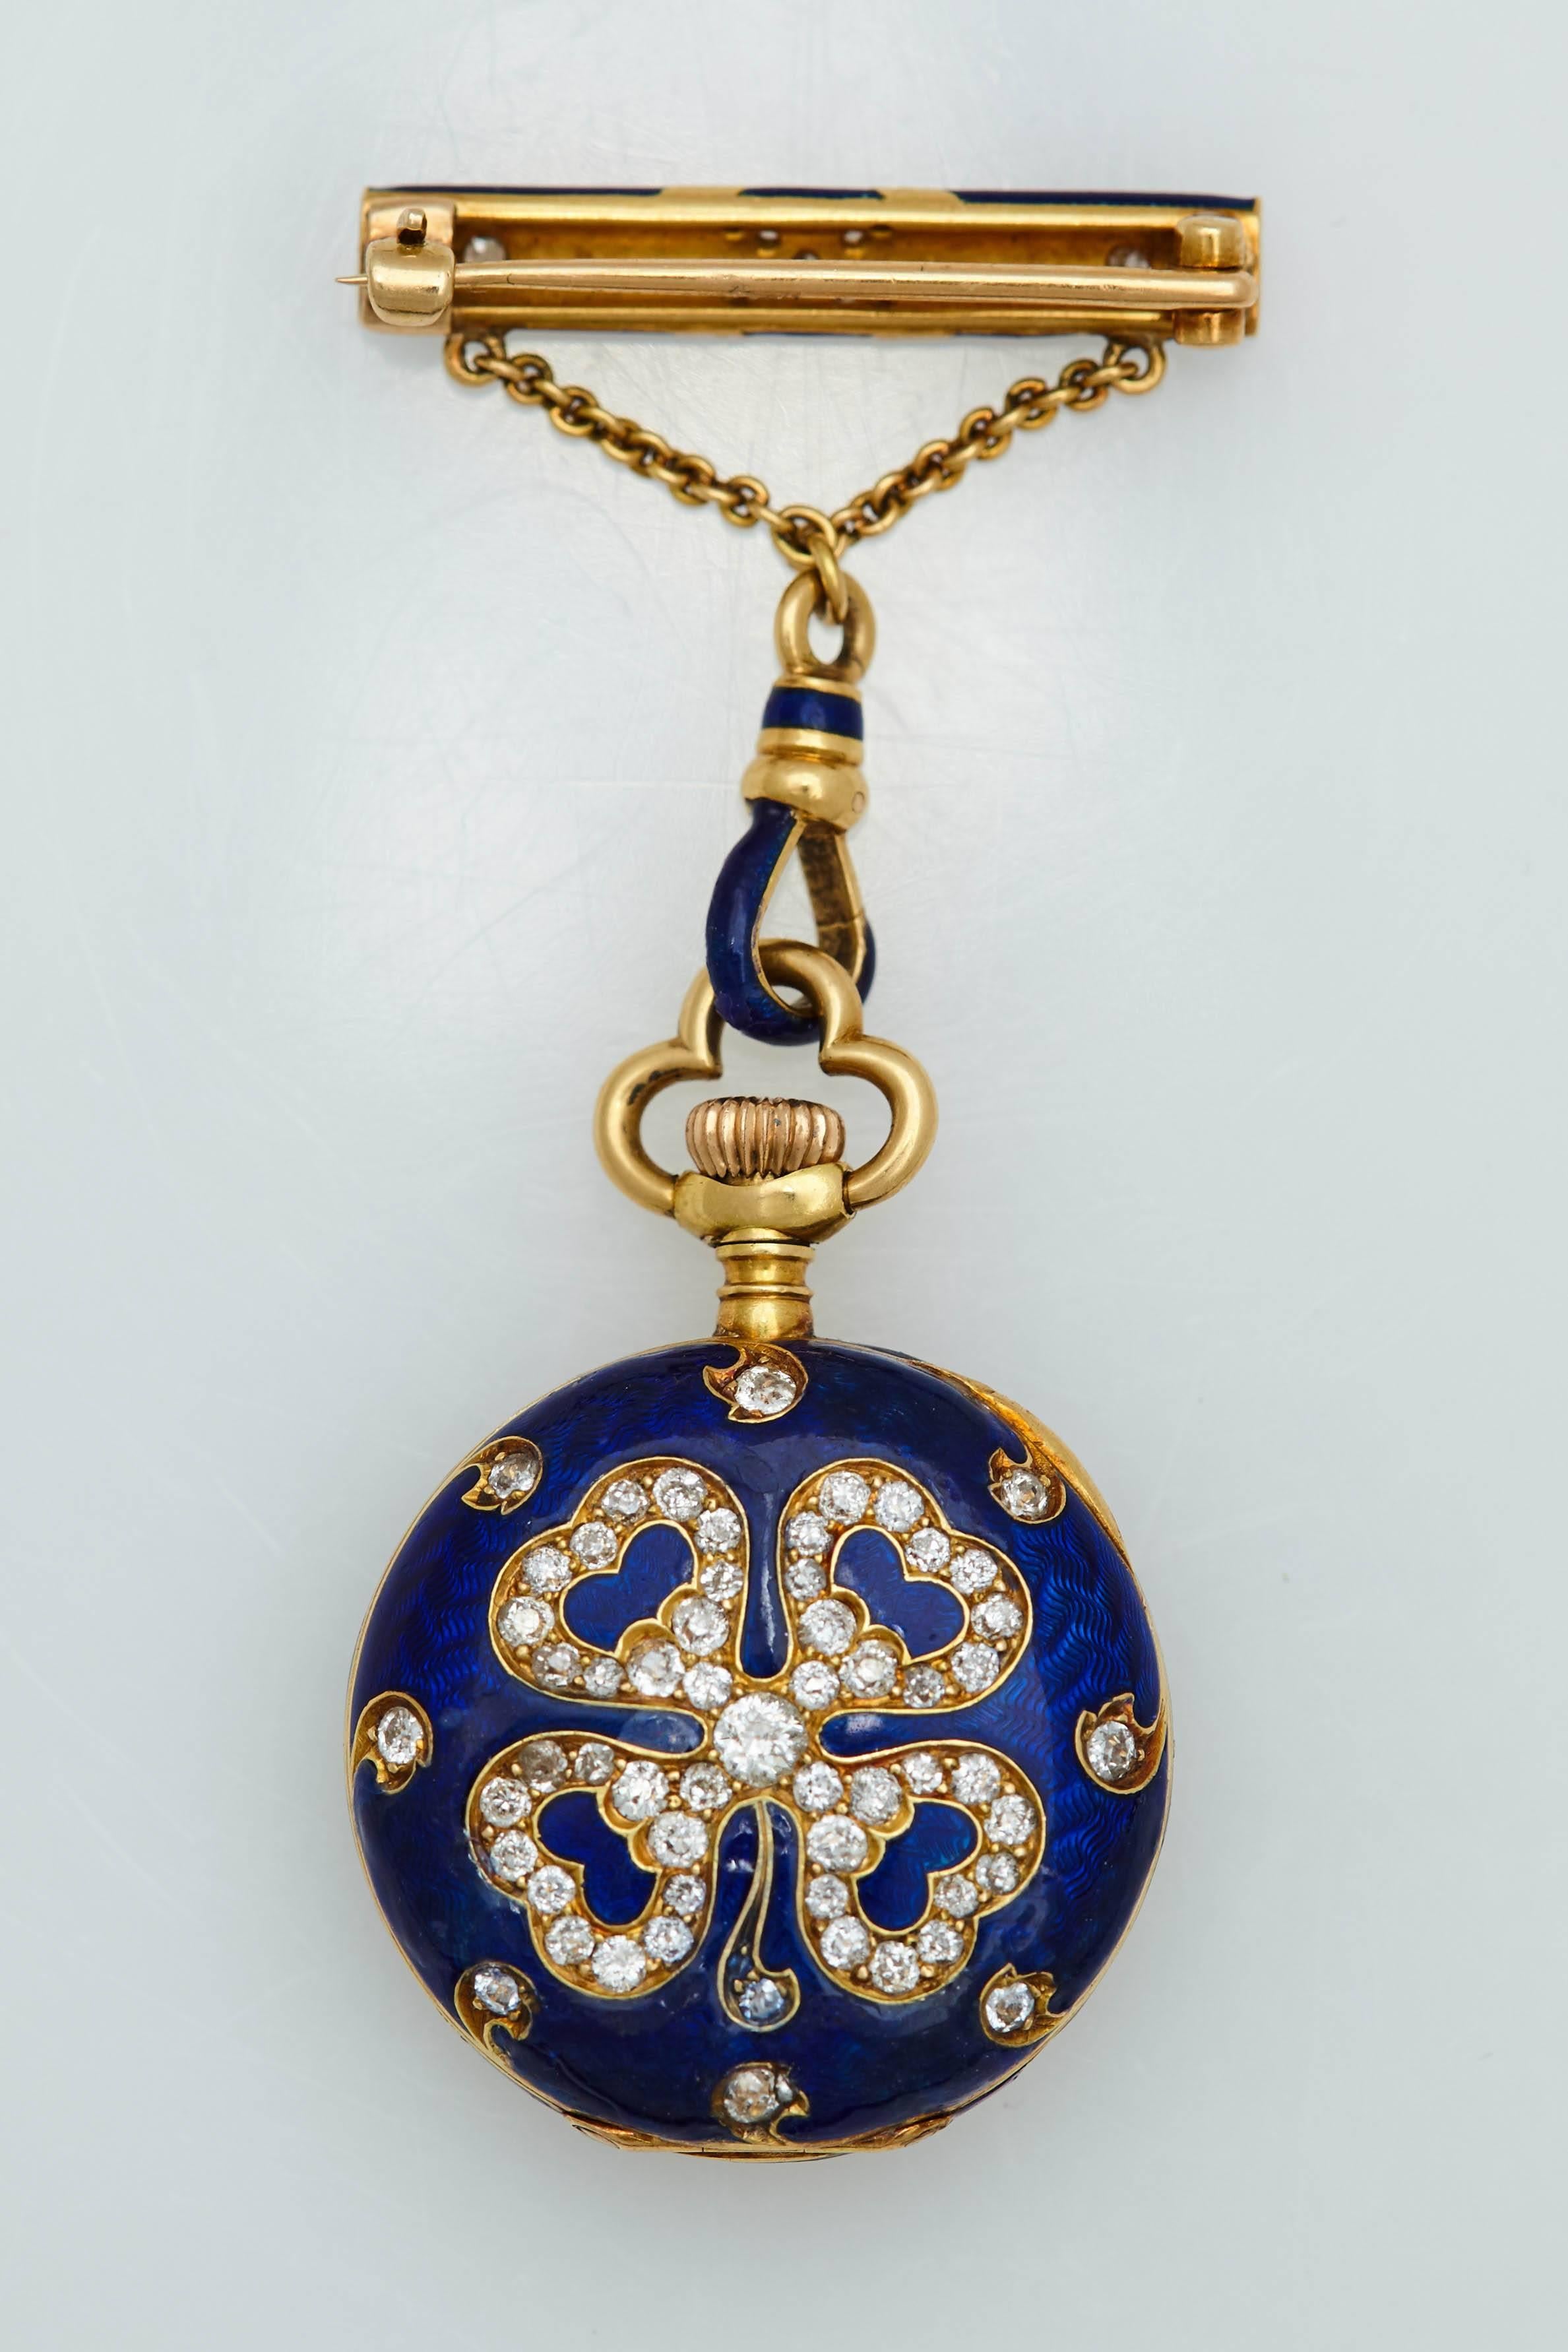 A beautiful ladies Victorian style Shamrock blue enamel, eighteen karat yellow gold and diamond brooch.  On one side of the blue enameled brooch is a Shamrock clover leaf pattern set with old mine cut diamonds and on the reverse side of the brooch